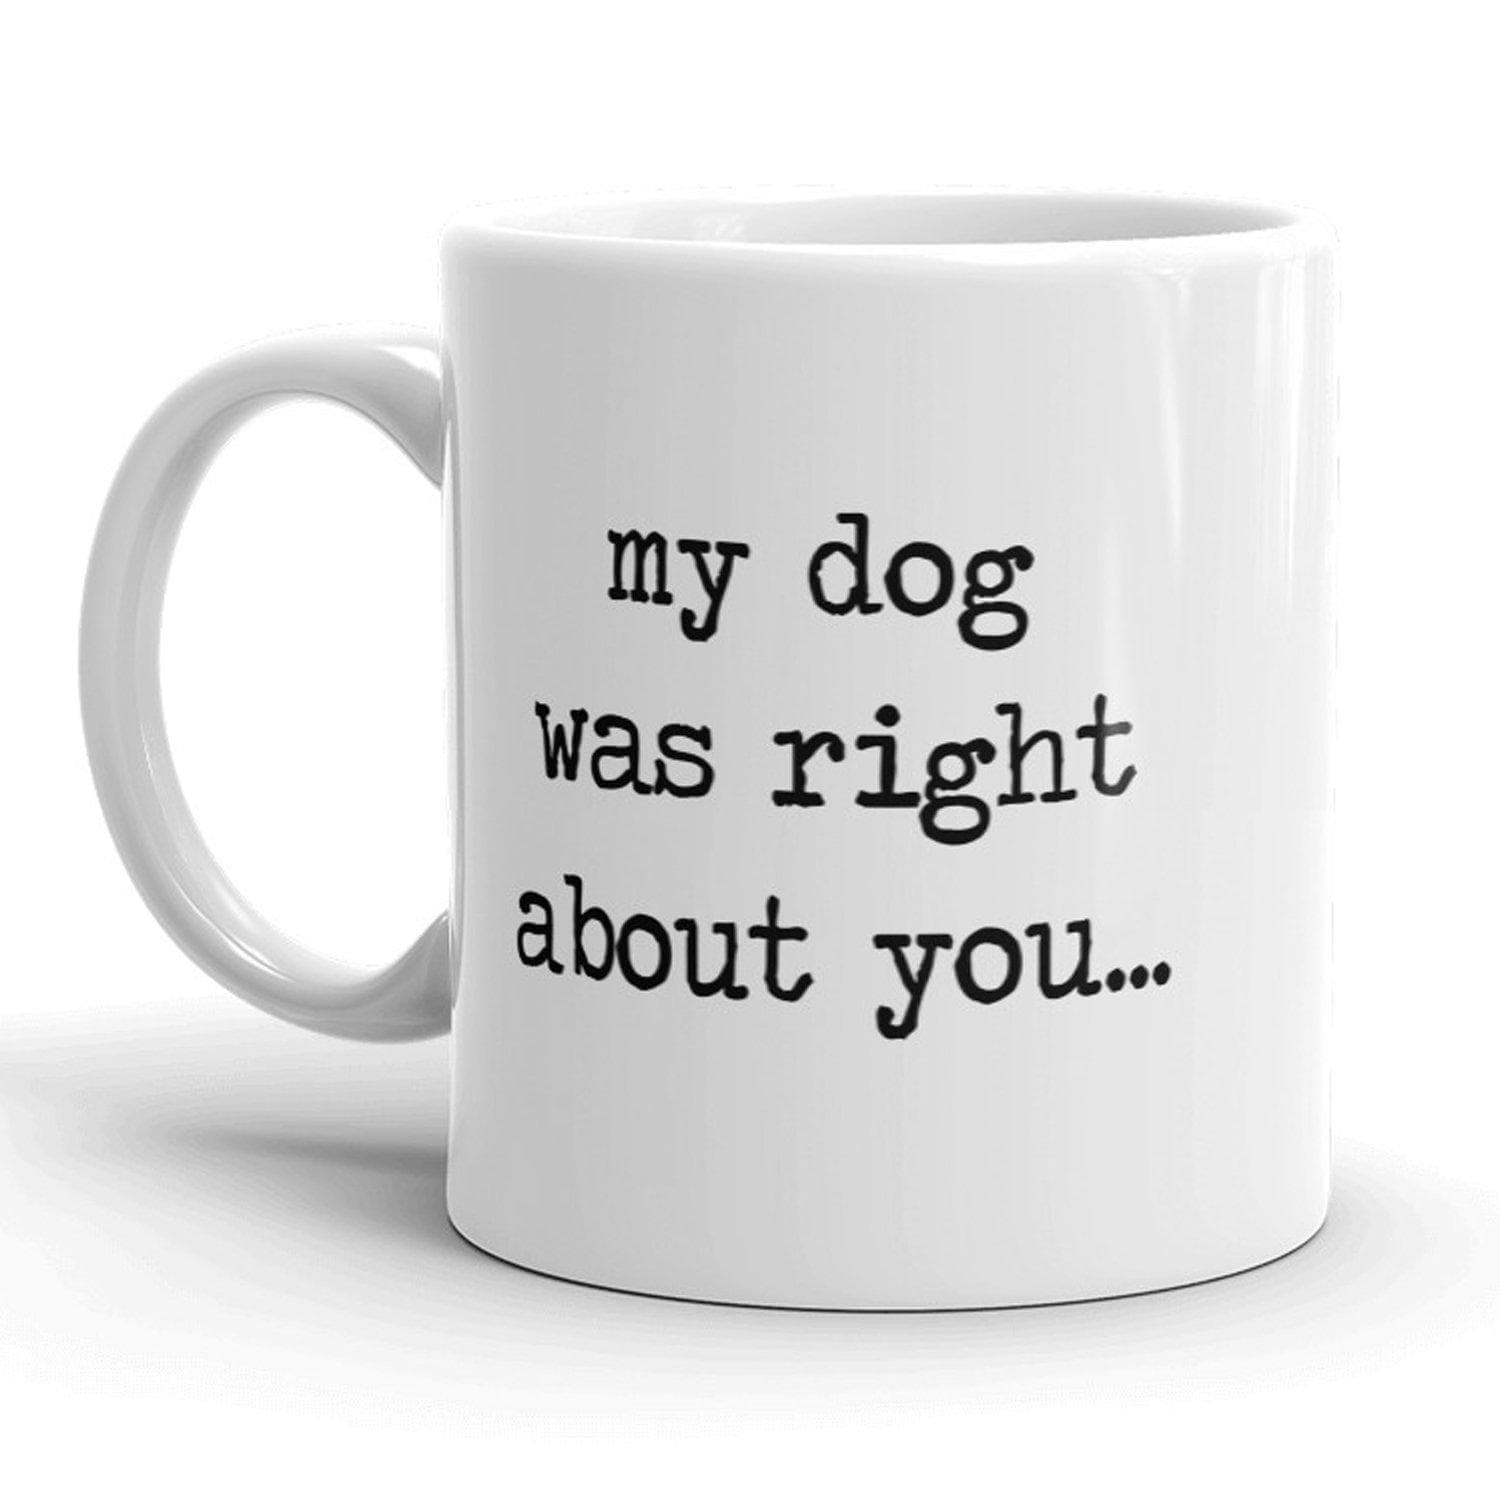 My Dog Was Right About You Mug - Crazy Dog T-Shirts